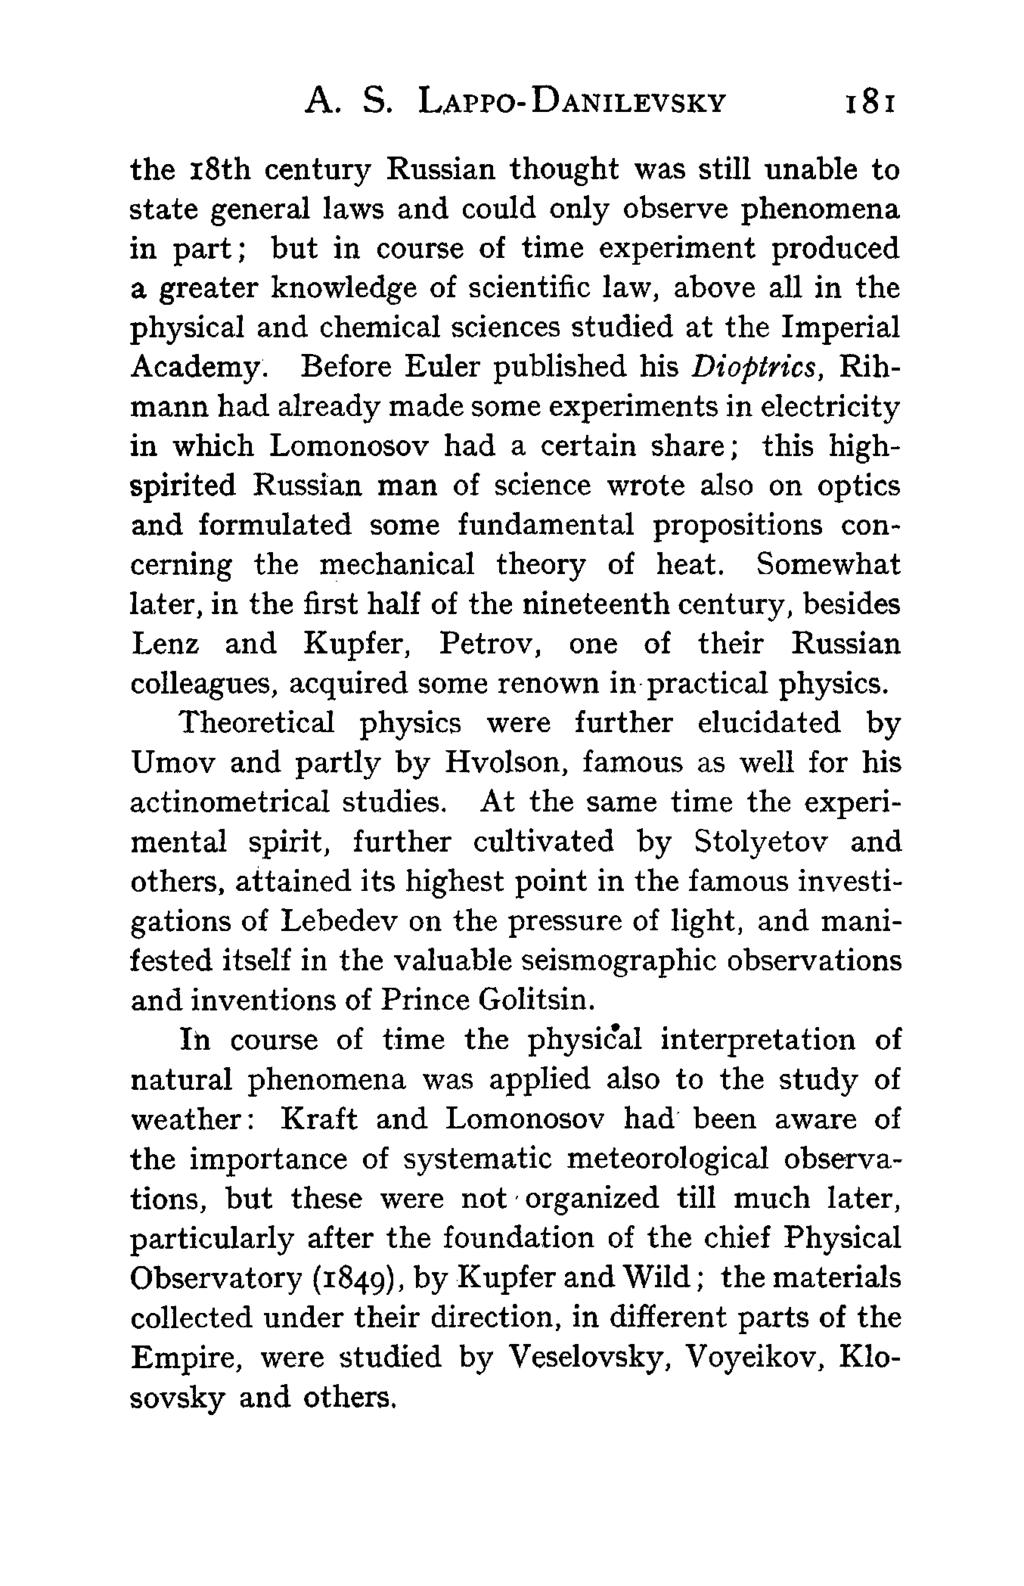 A. S. LAPPO-DANILEVSKY 181 the 18th century Russian thought was still unable to state general laws and could only observe phenomena in part; but in course of time experiment produced a greater